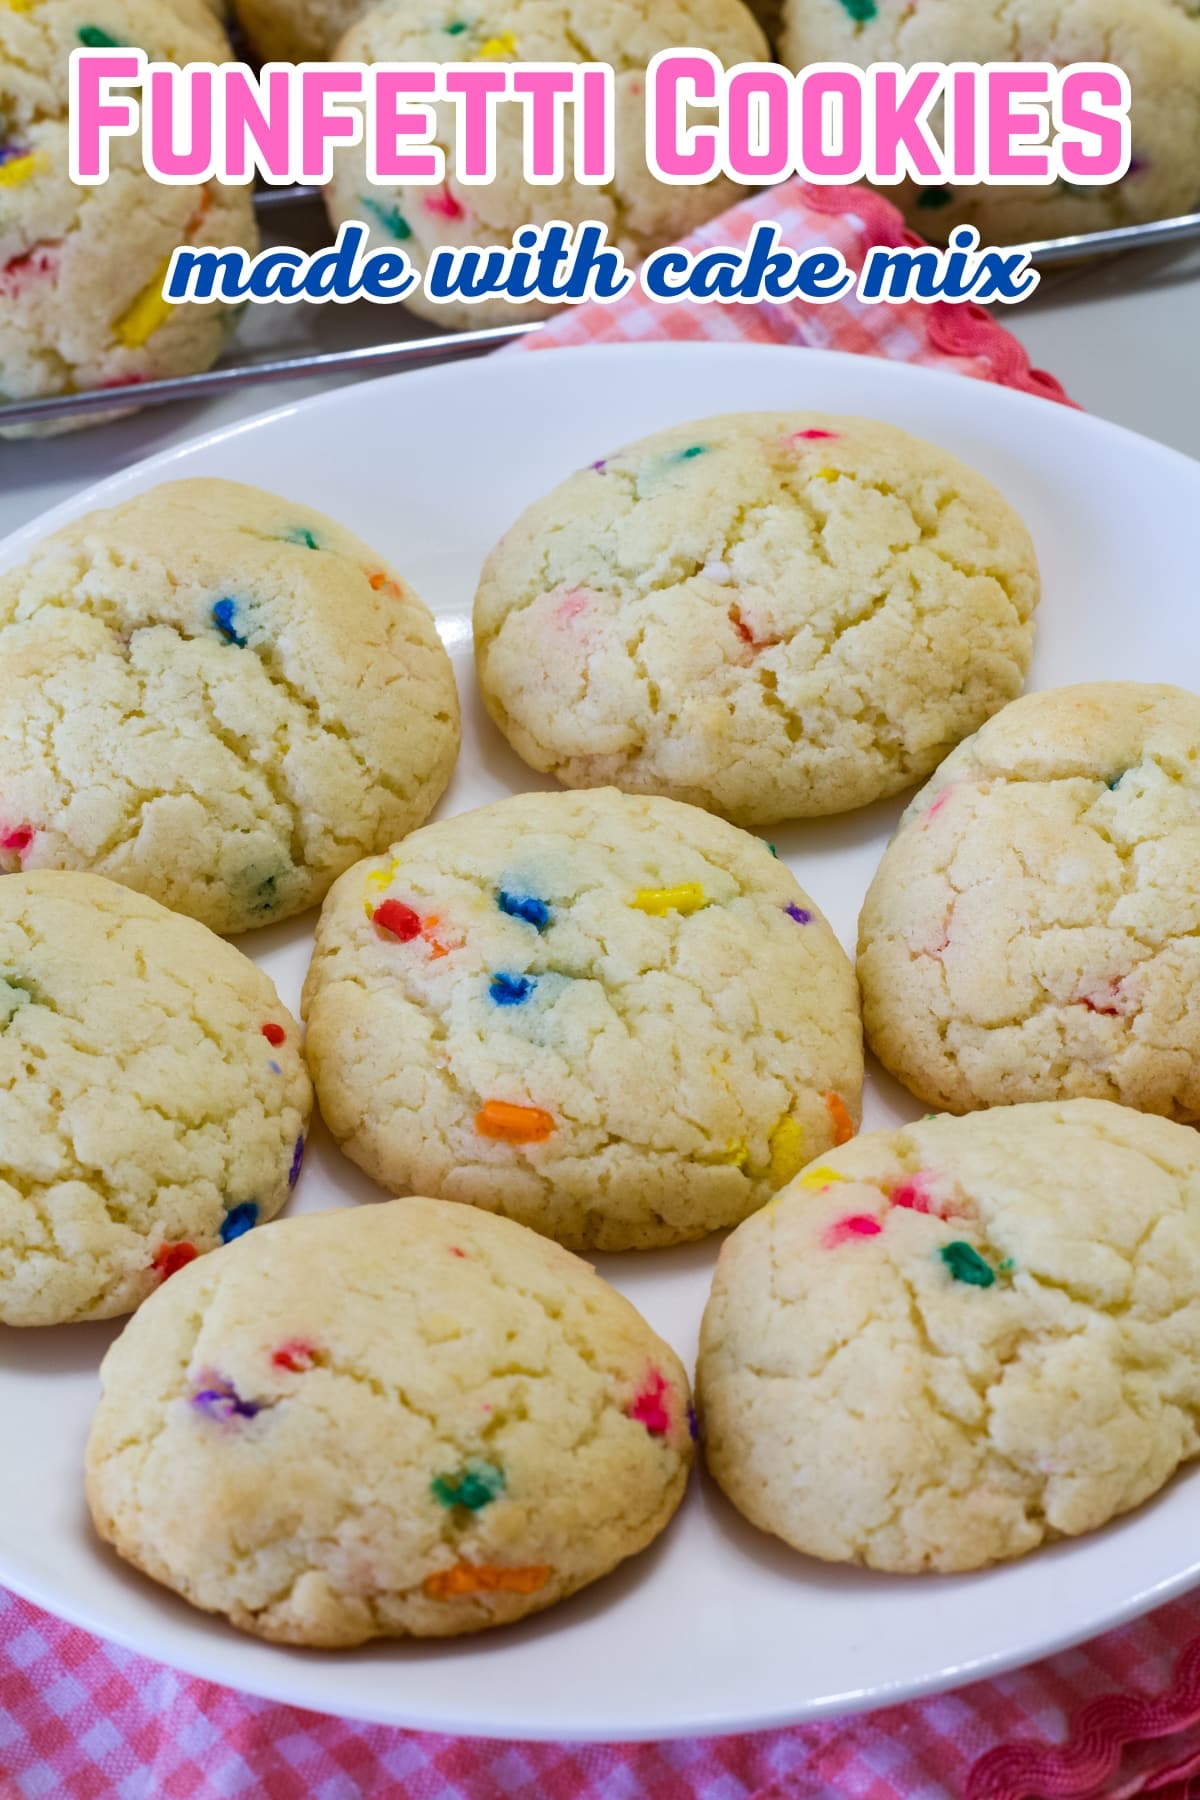 Cake in cookie form in just minutes with this simple Funfetti Cookies Recipe. Use your favorite brand cake mix and make these yummy cookies today! via @mindyscookingobsession